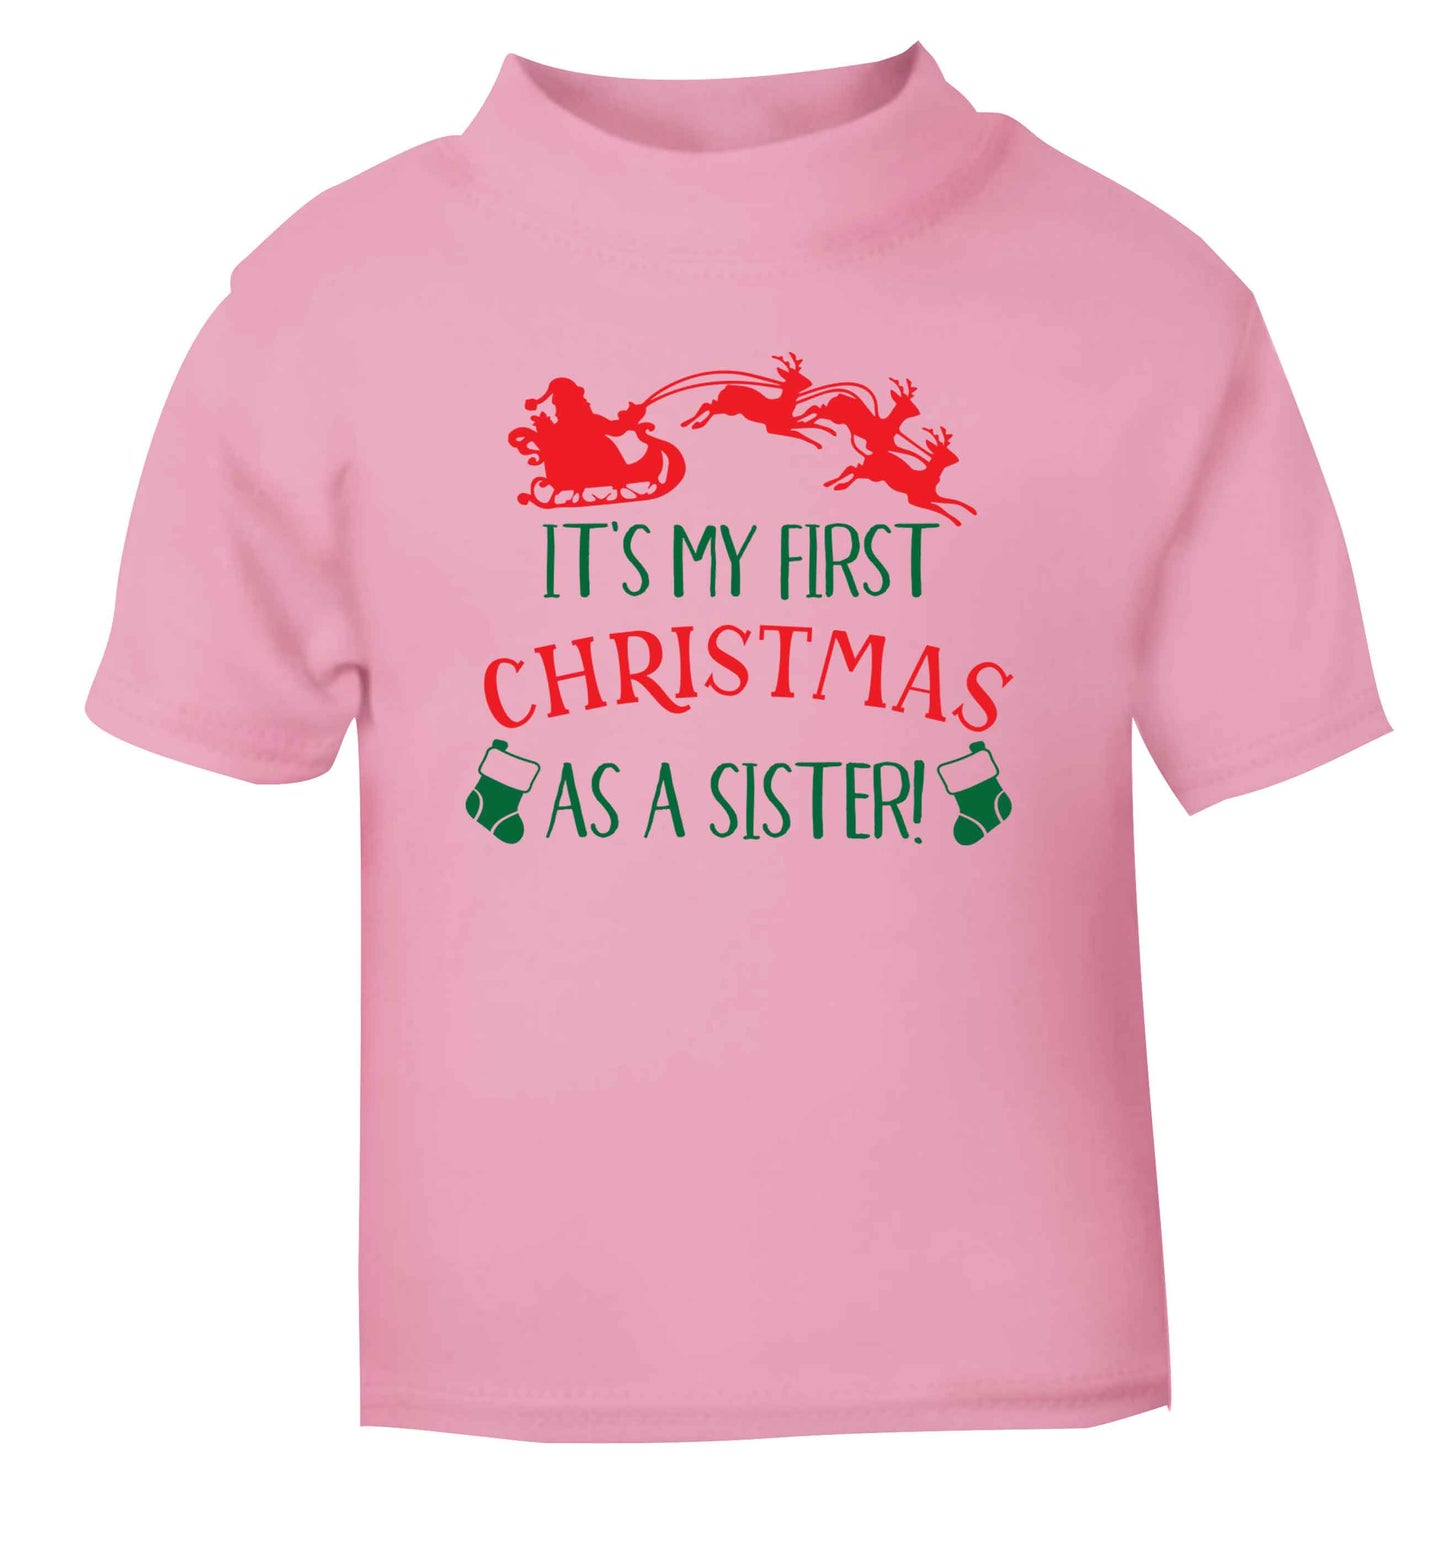 It's my first Christmas as a sister! light pink Baby Toddler Tshirt 2 Years